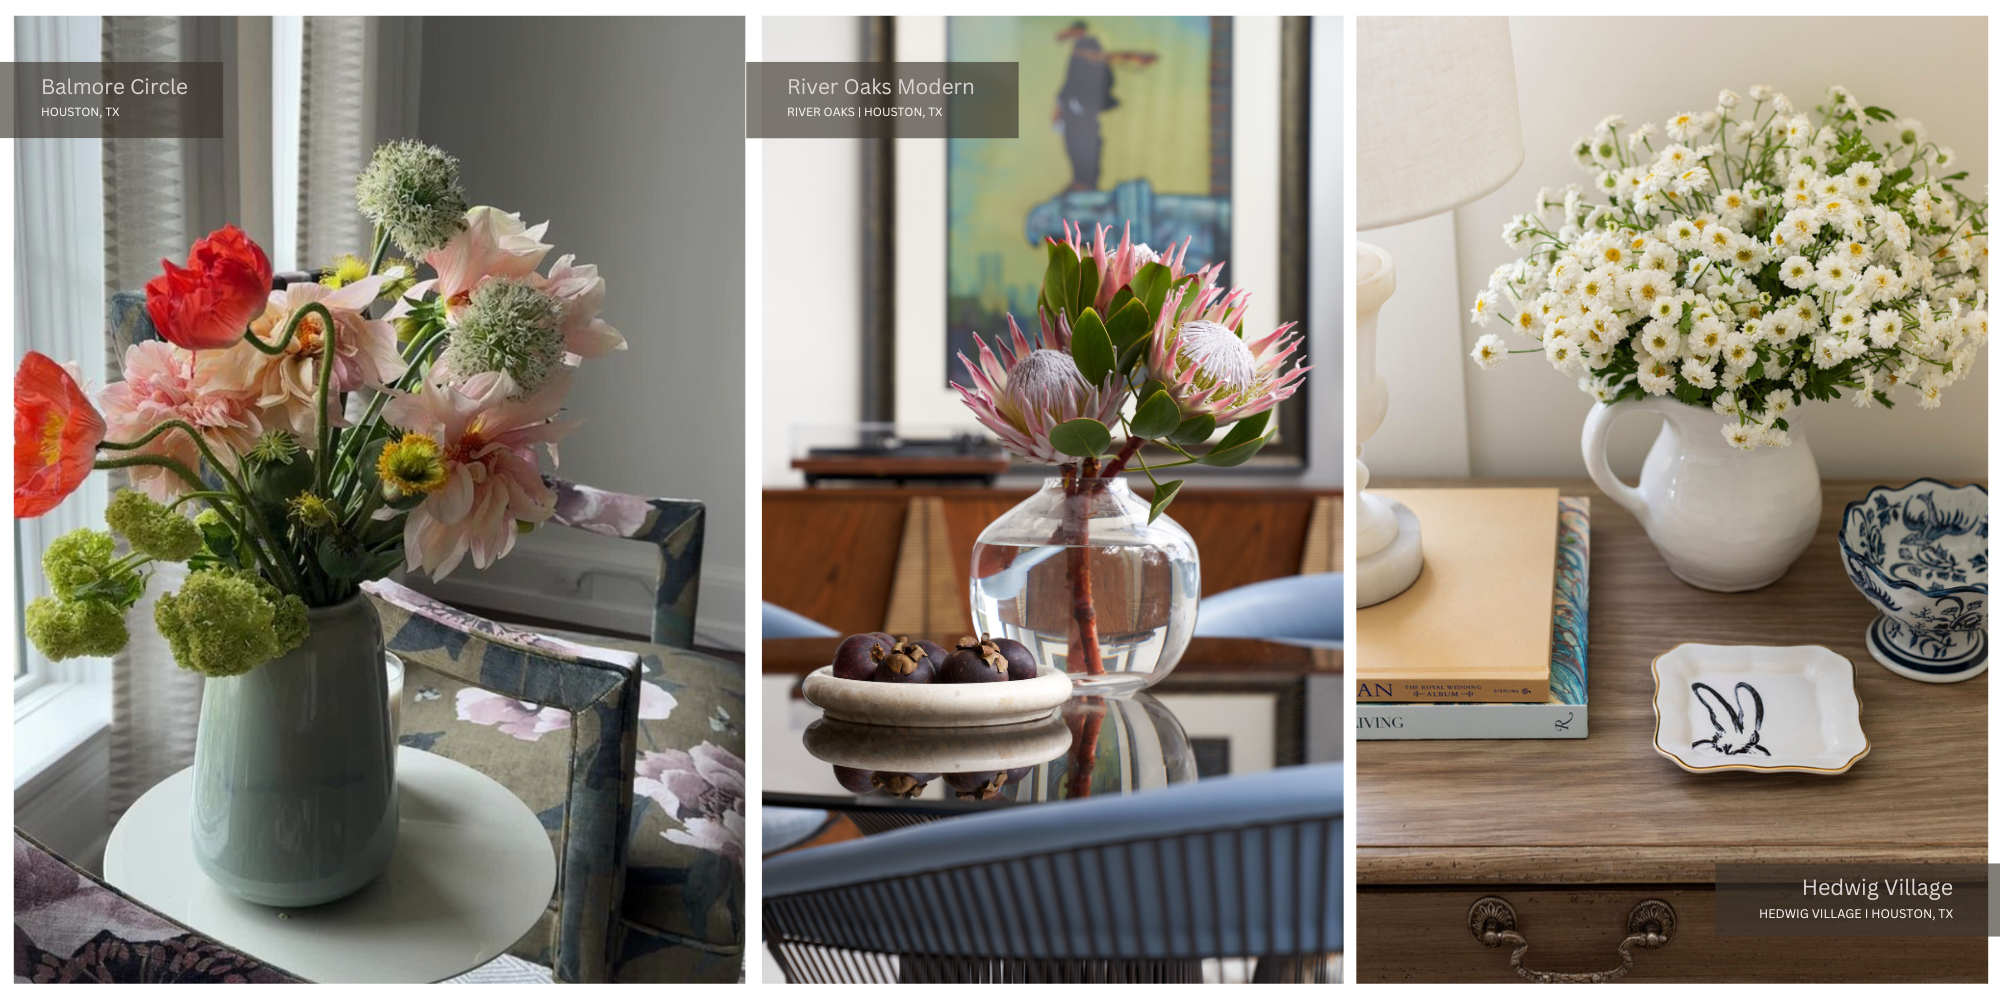 Various floral arrangements from Balmore, River Oaks Modern, and Hedwig Village.